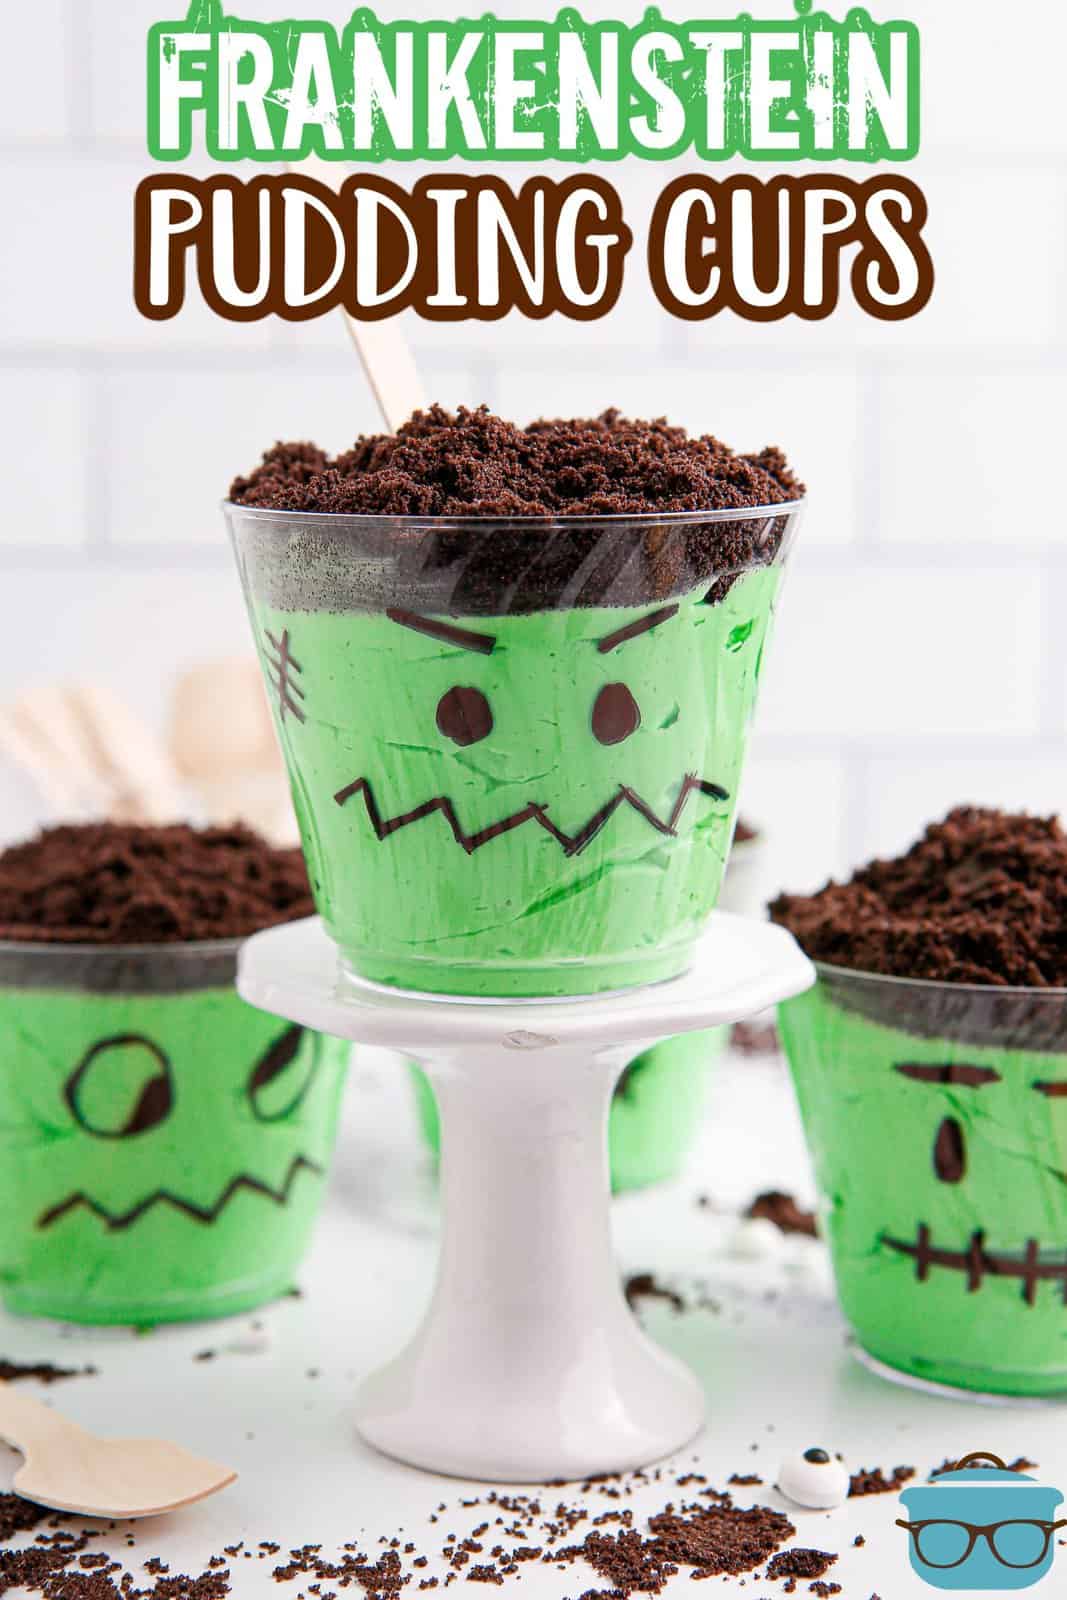 A pedestal with a Frankenstein Pudding Cup and a few surrounding it.